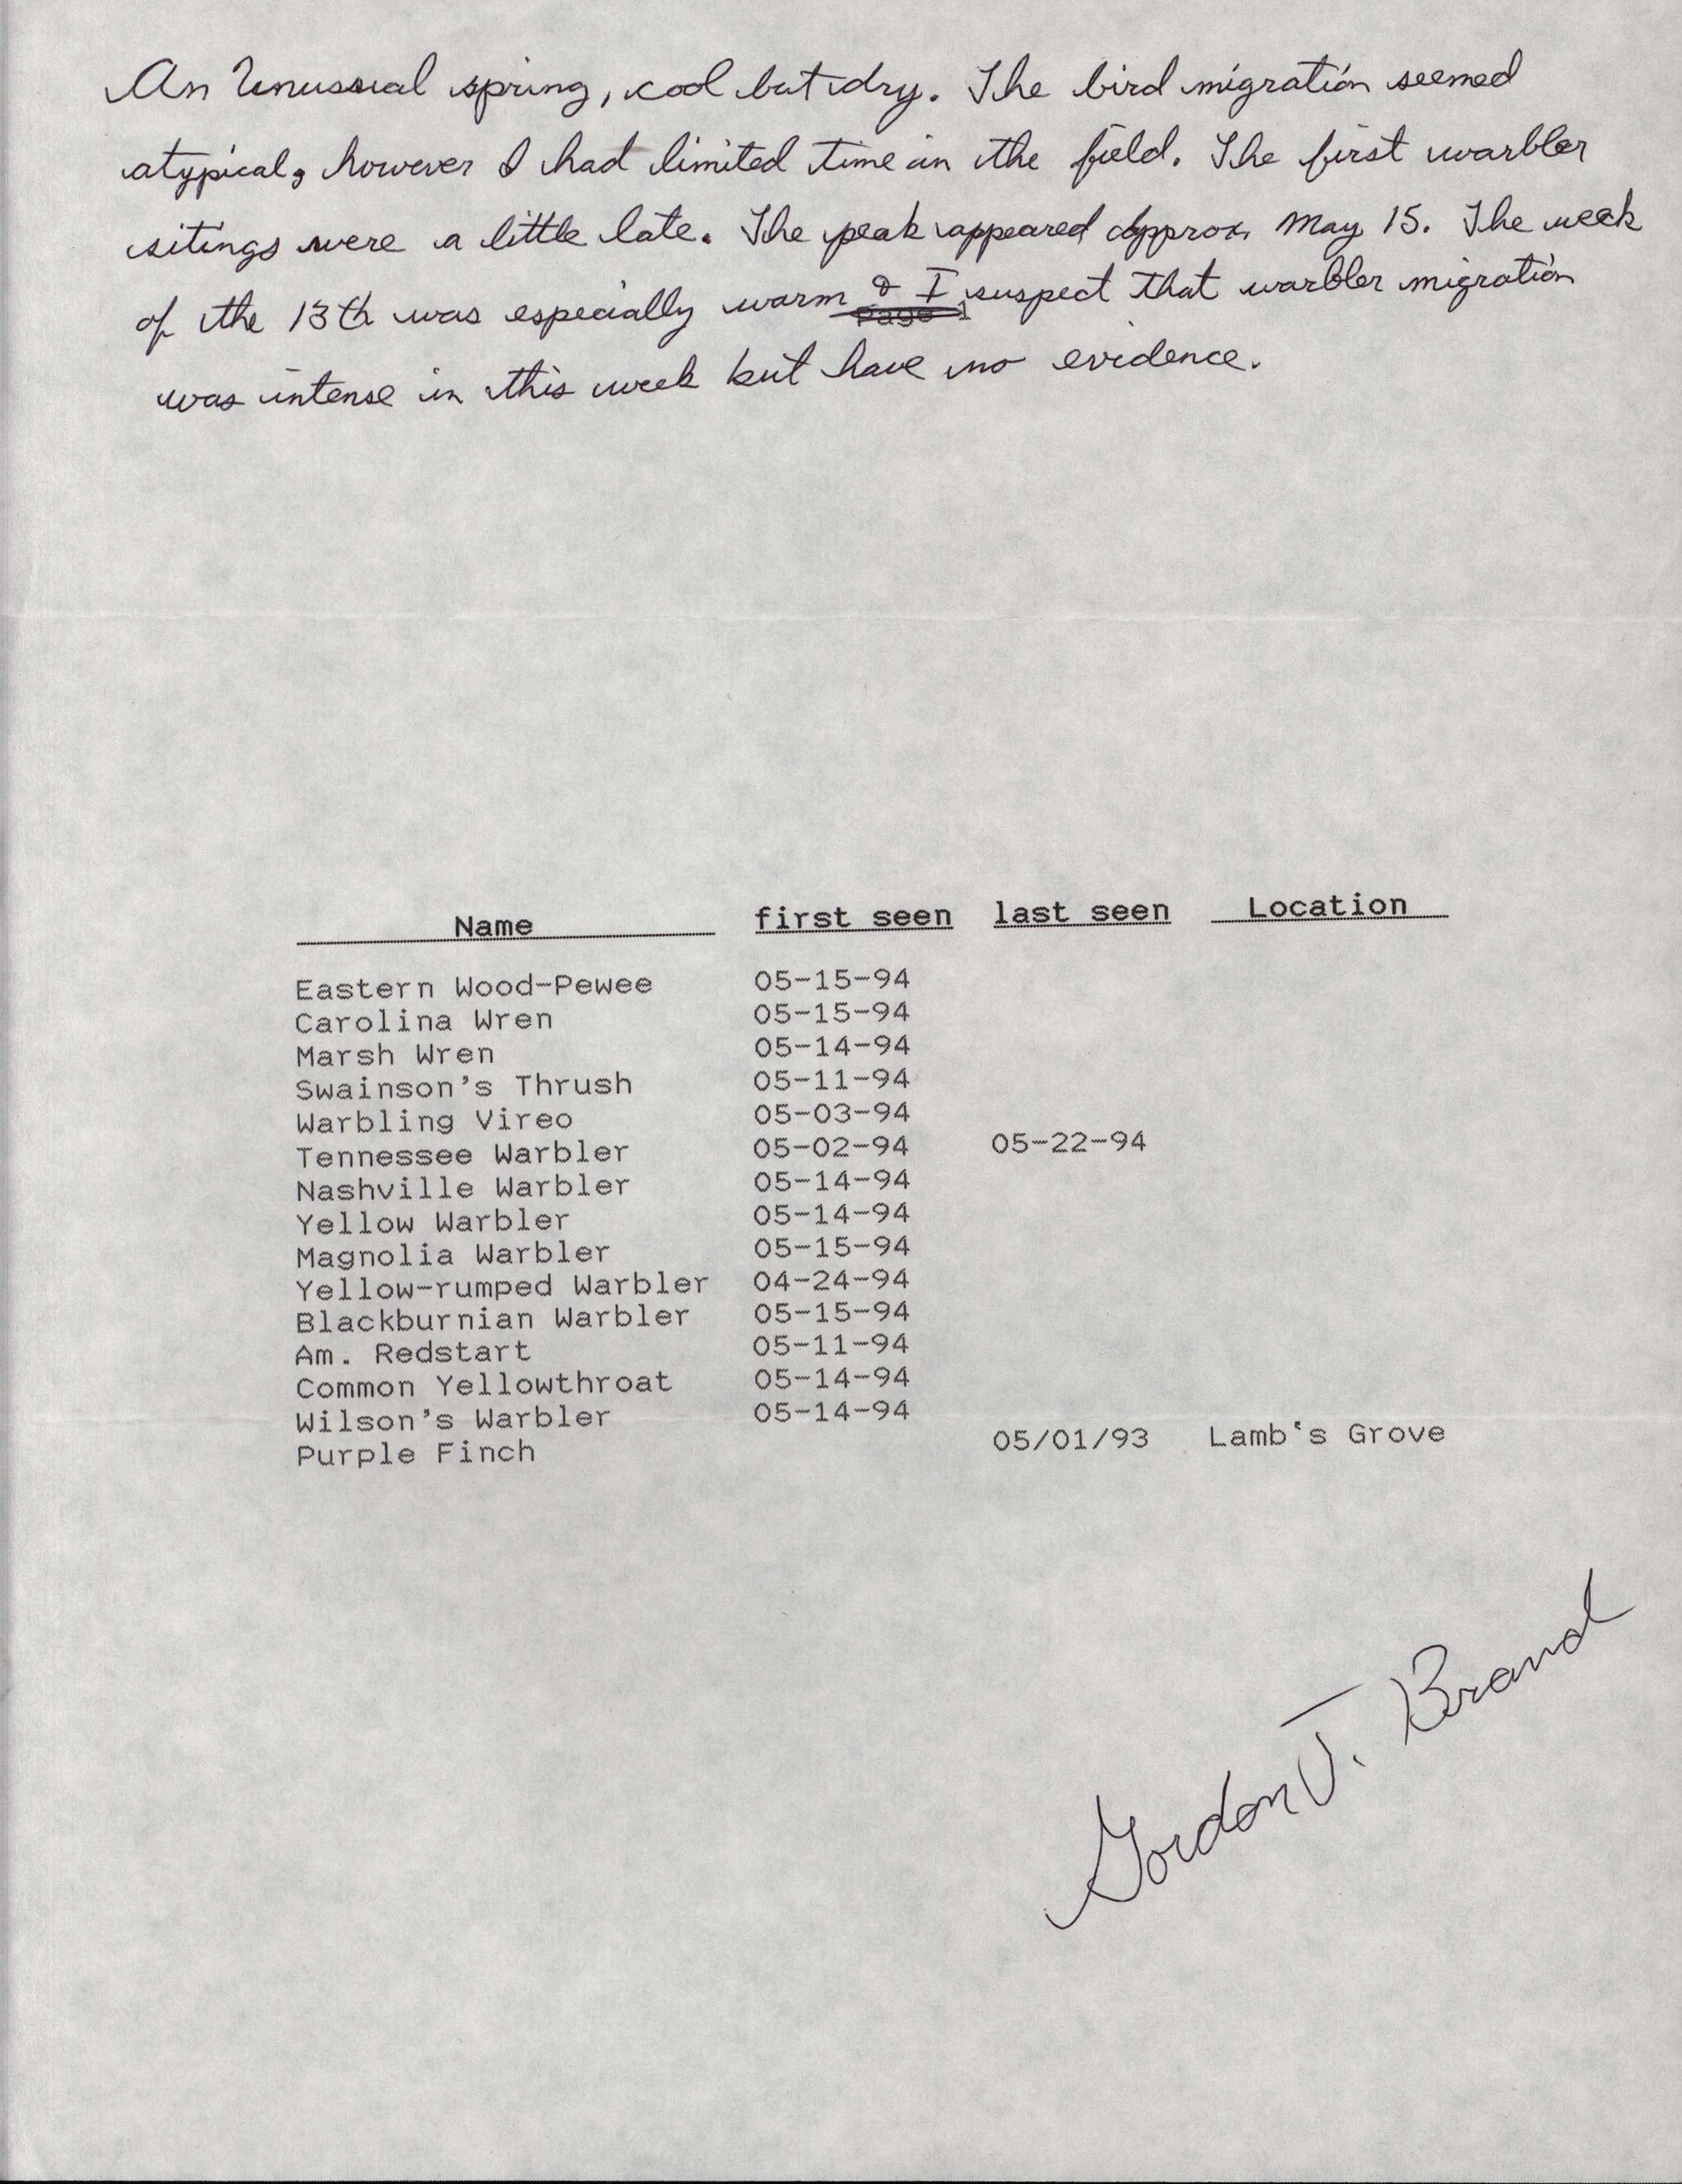 Annotated bird sighting list for Spring 1994 compiled by Gordon Brand